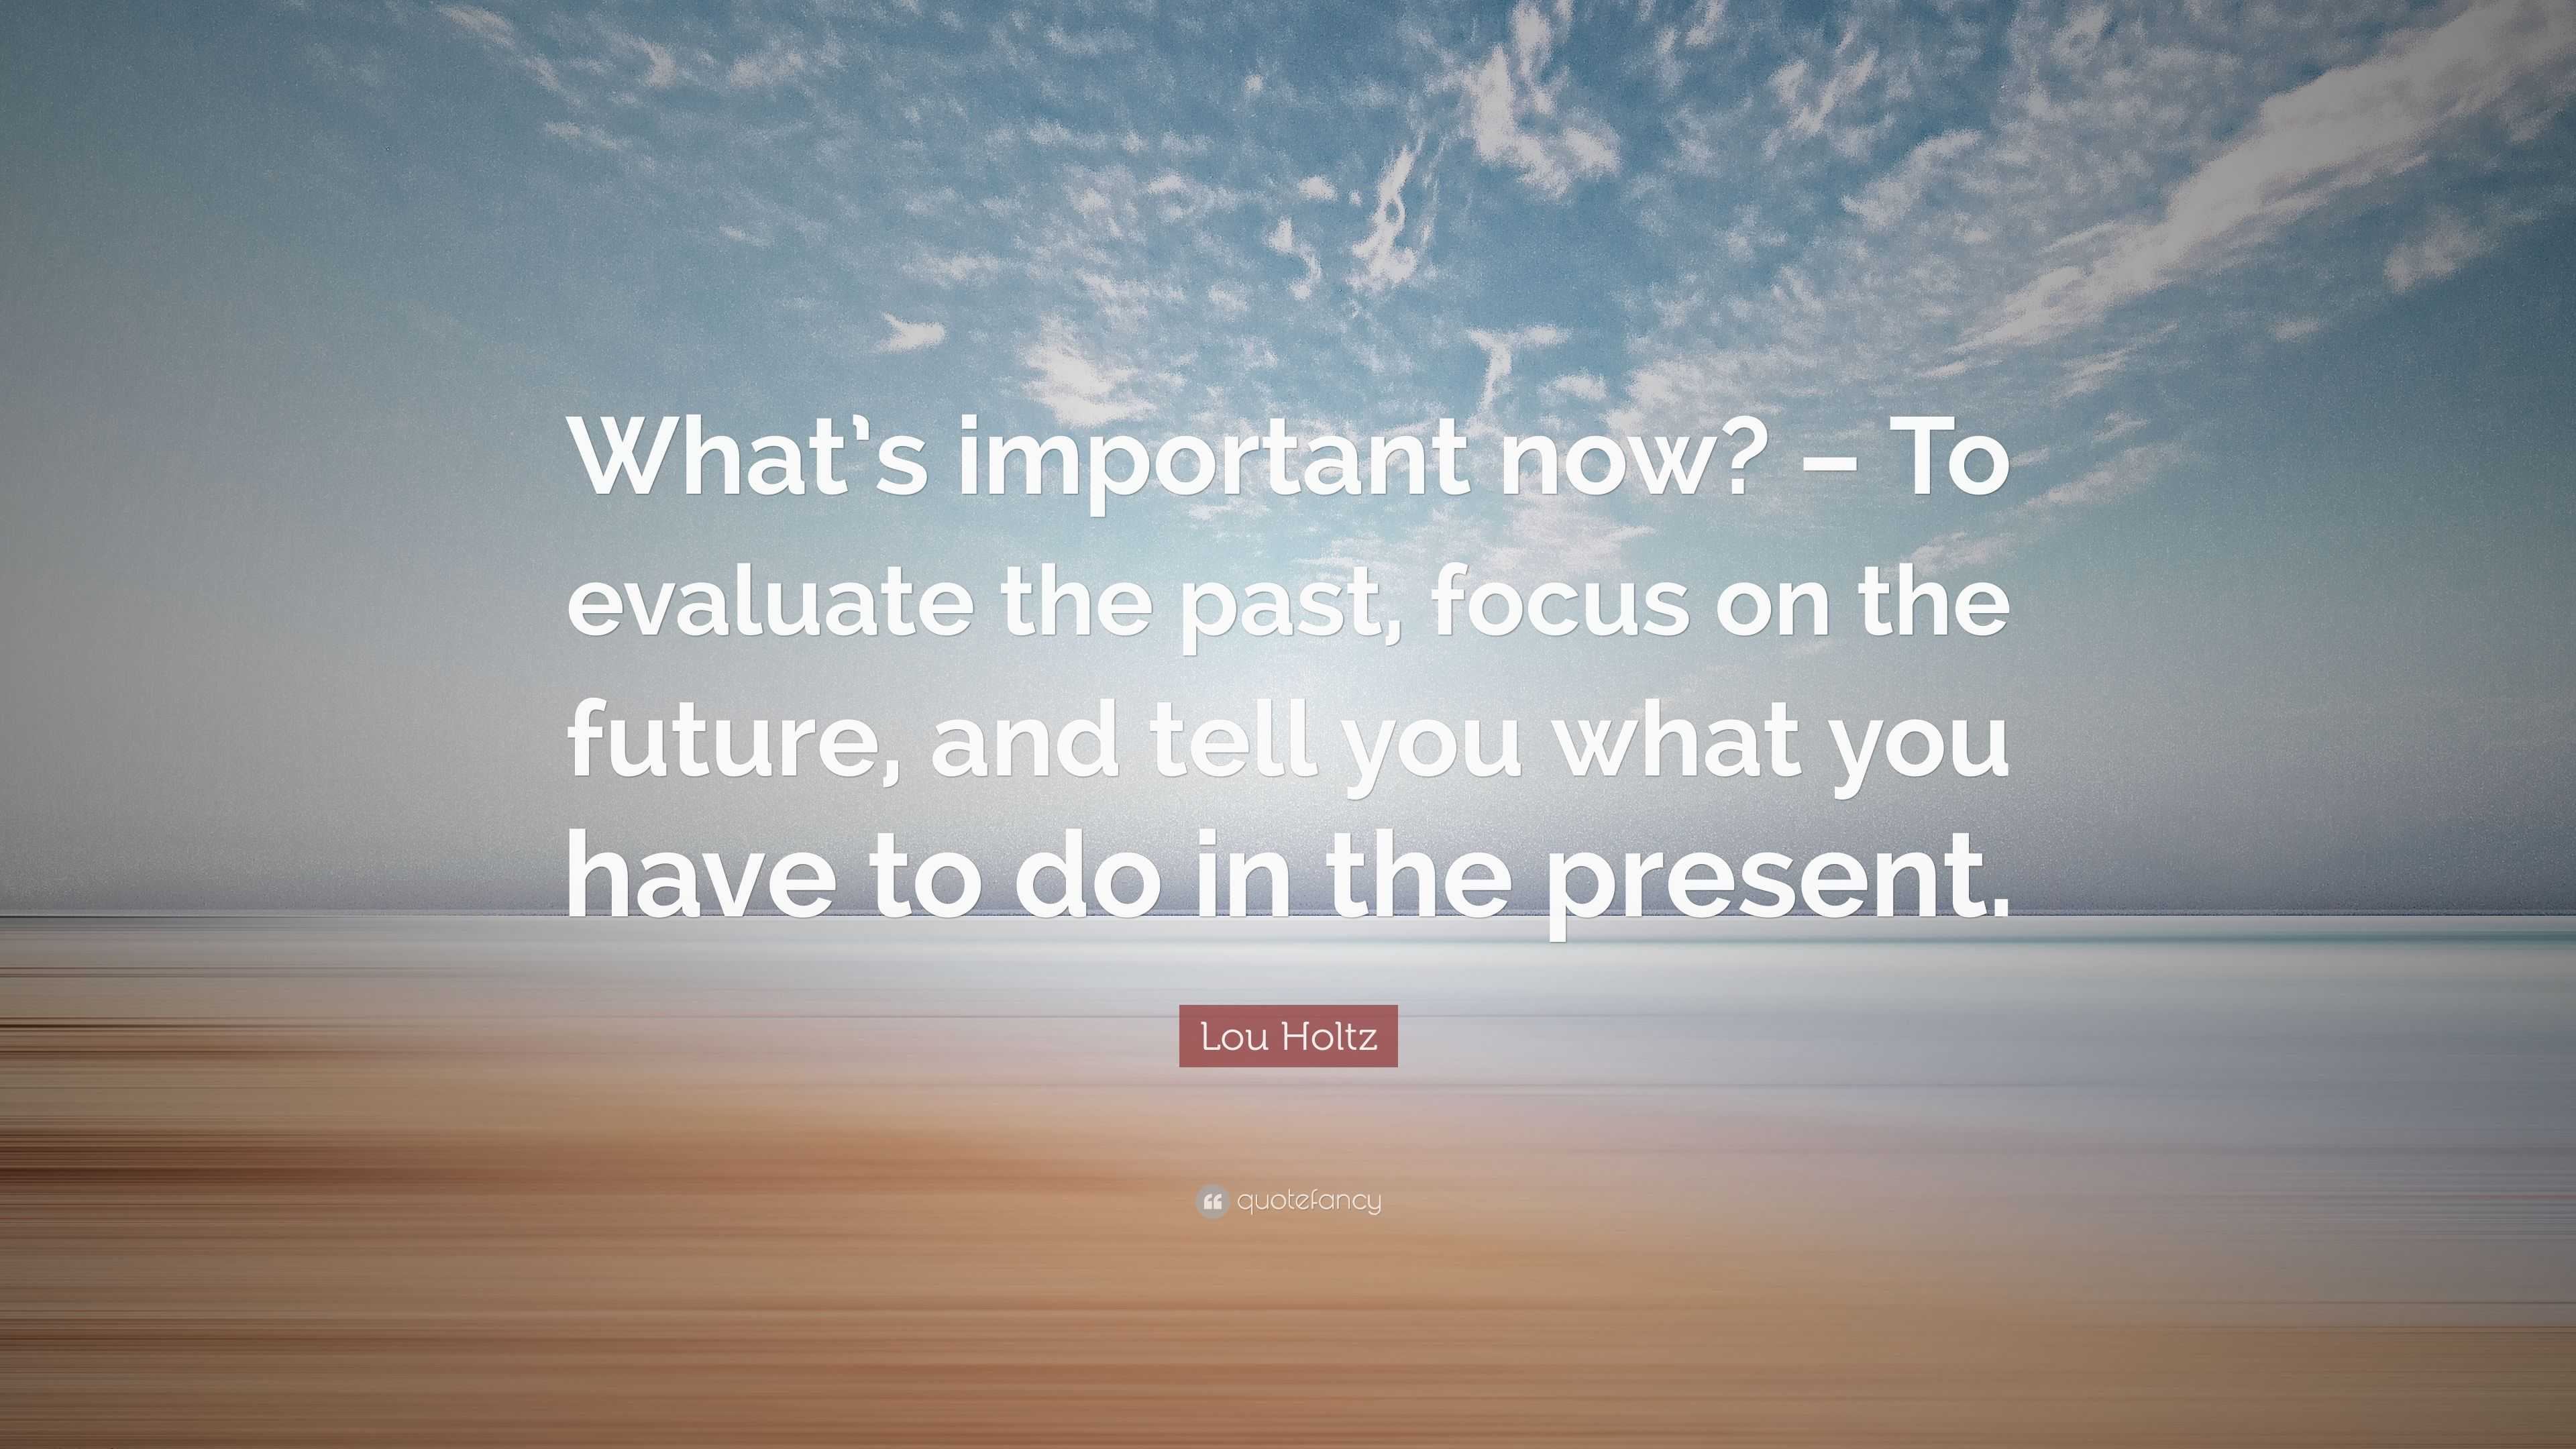 Lou Holtz Quote: “What’s important now? – To evaluate the past, focus ...